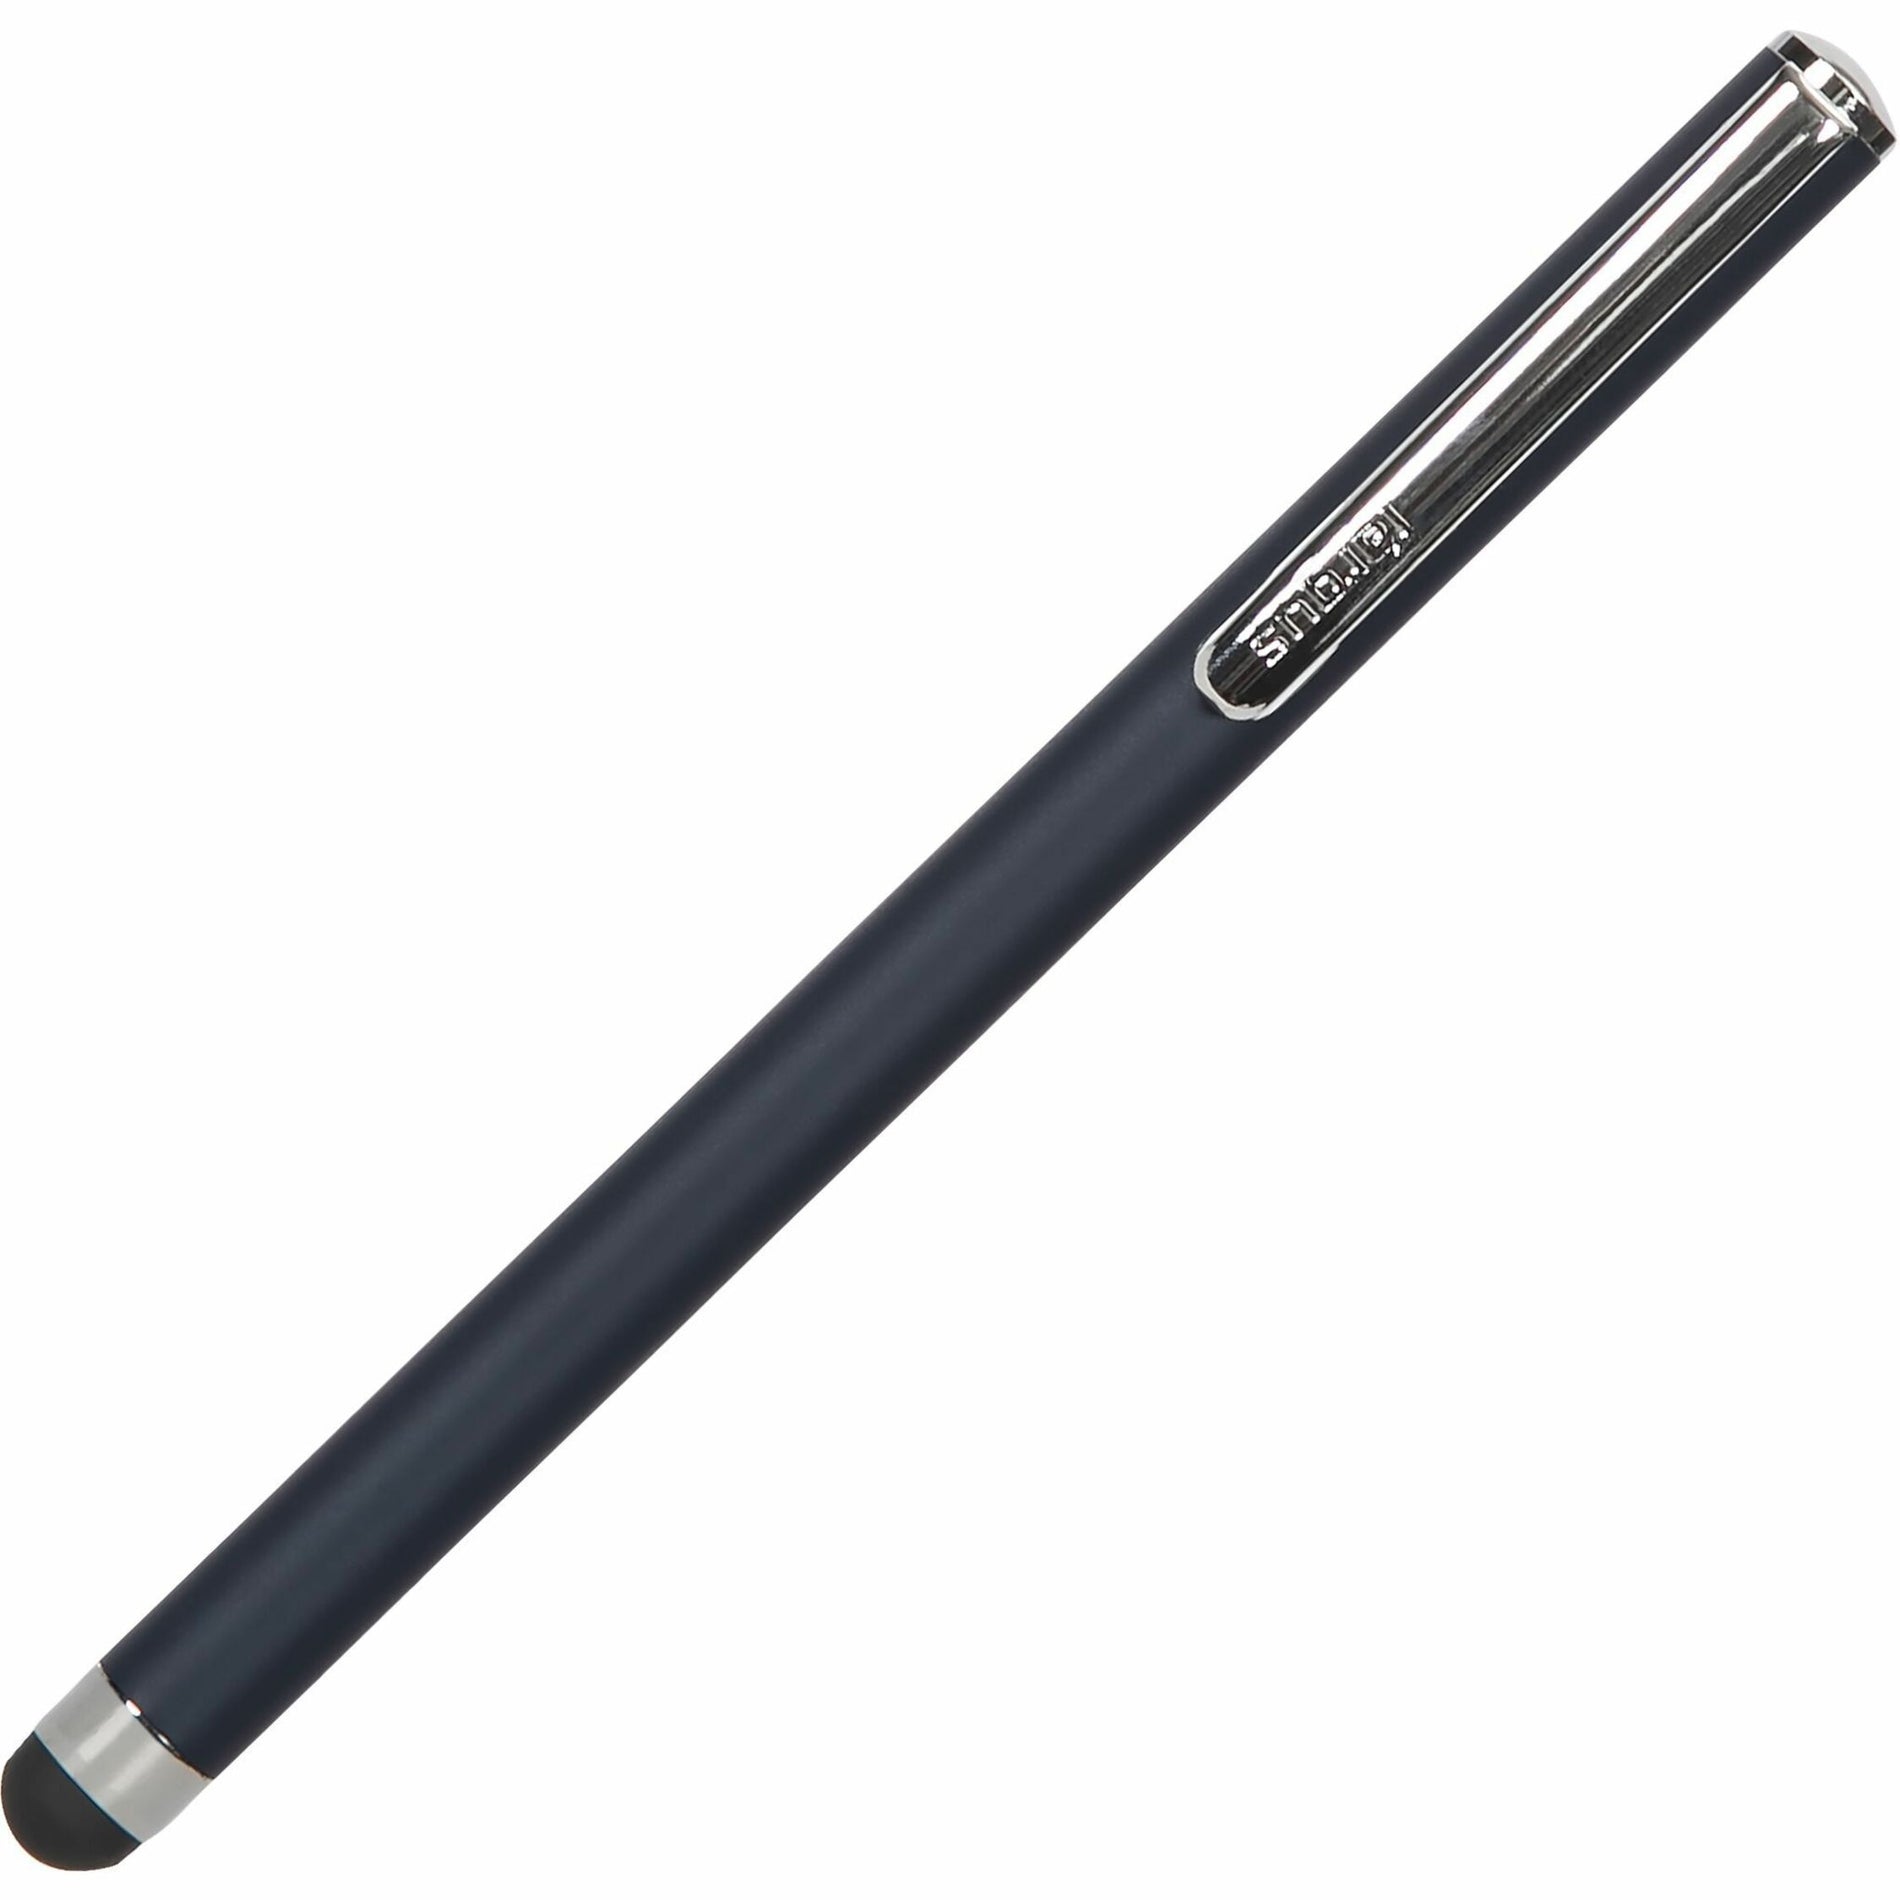 Targus AMM12US Slim Stylus for Smartphones, Black, Capacitive Touch Compatible